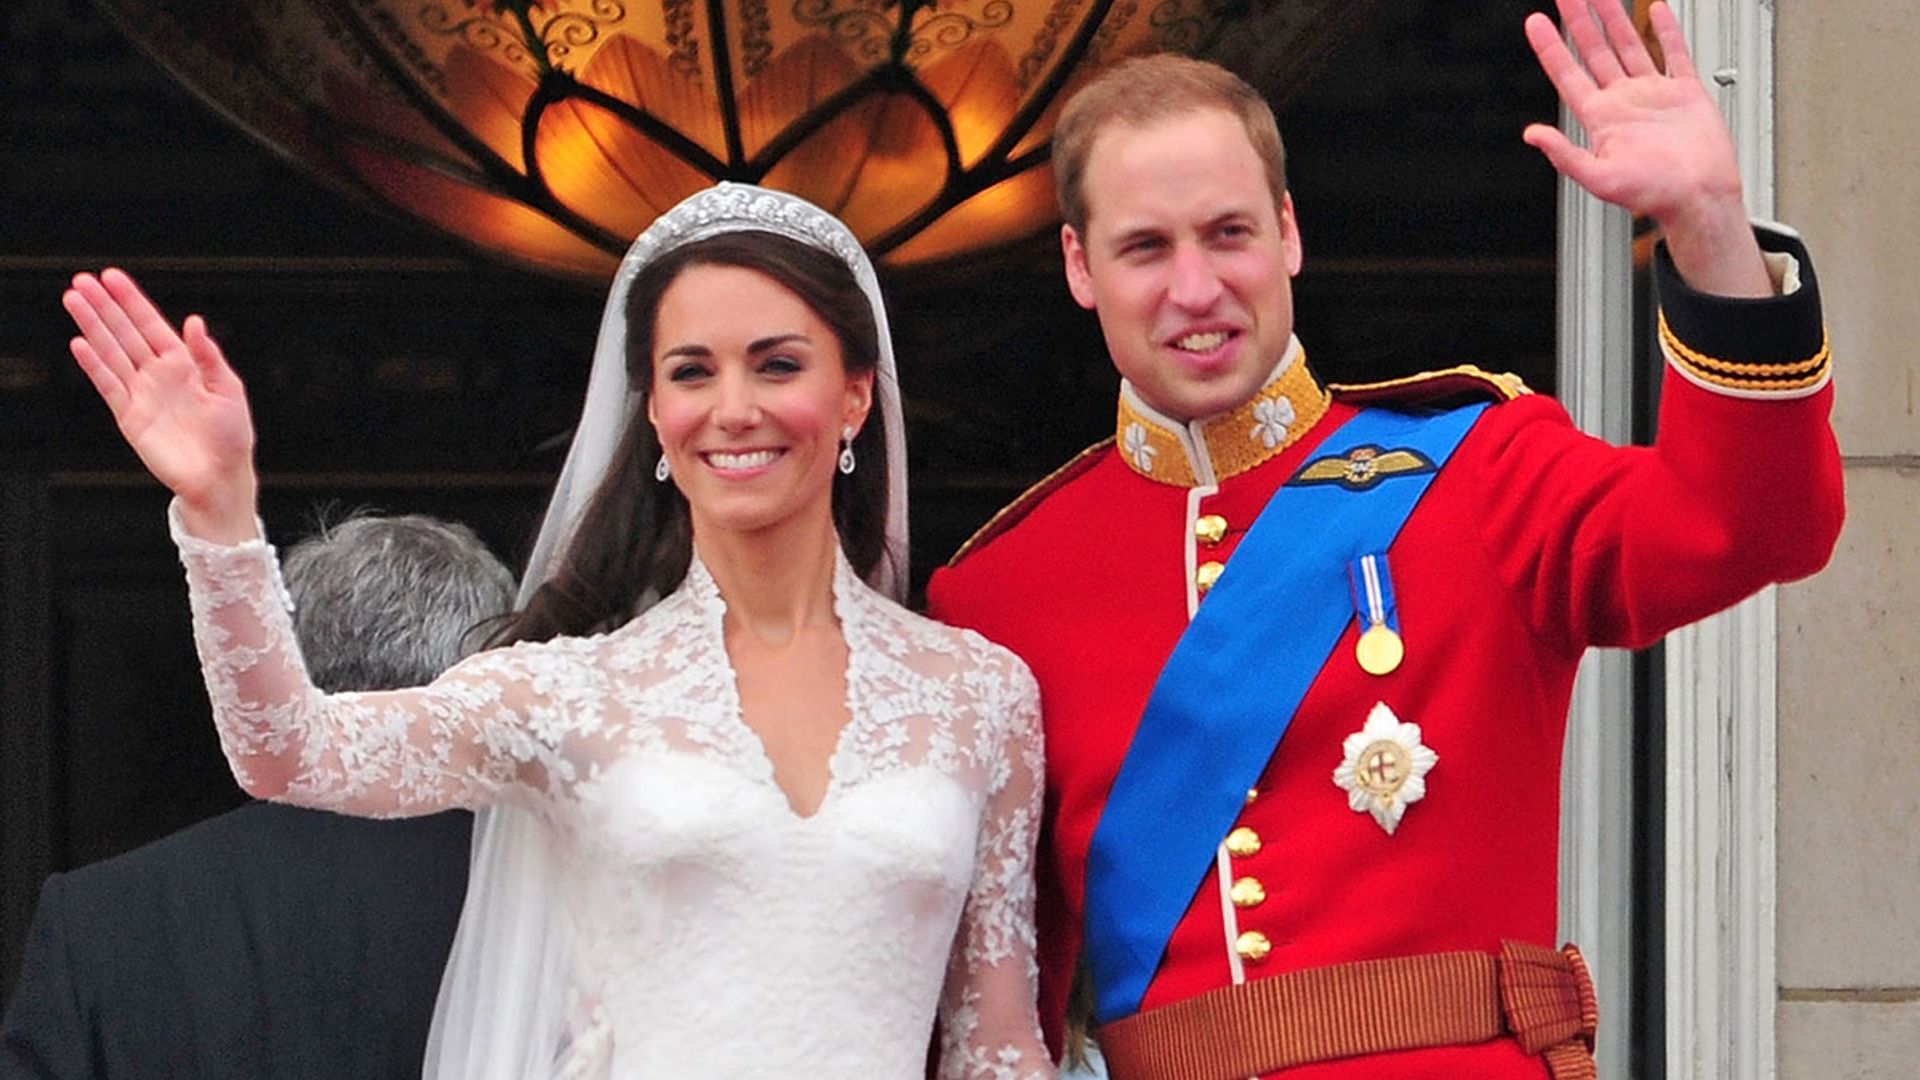 You can now buy Kate Middleton's Alexander McQueen wedding dress for £6,000